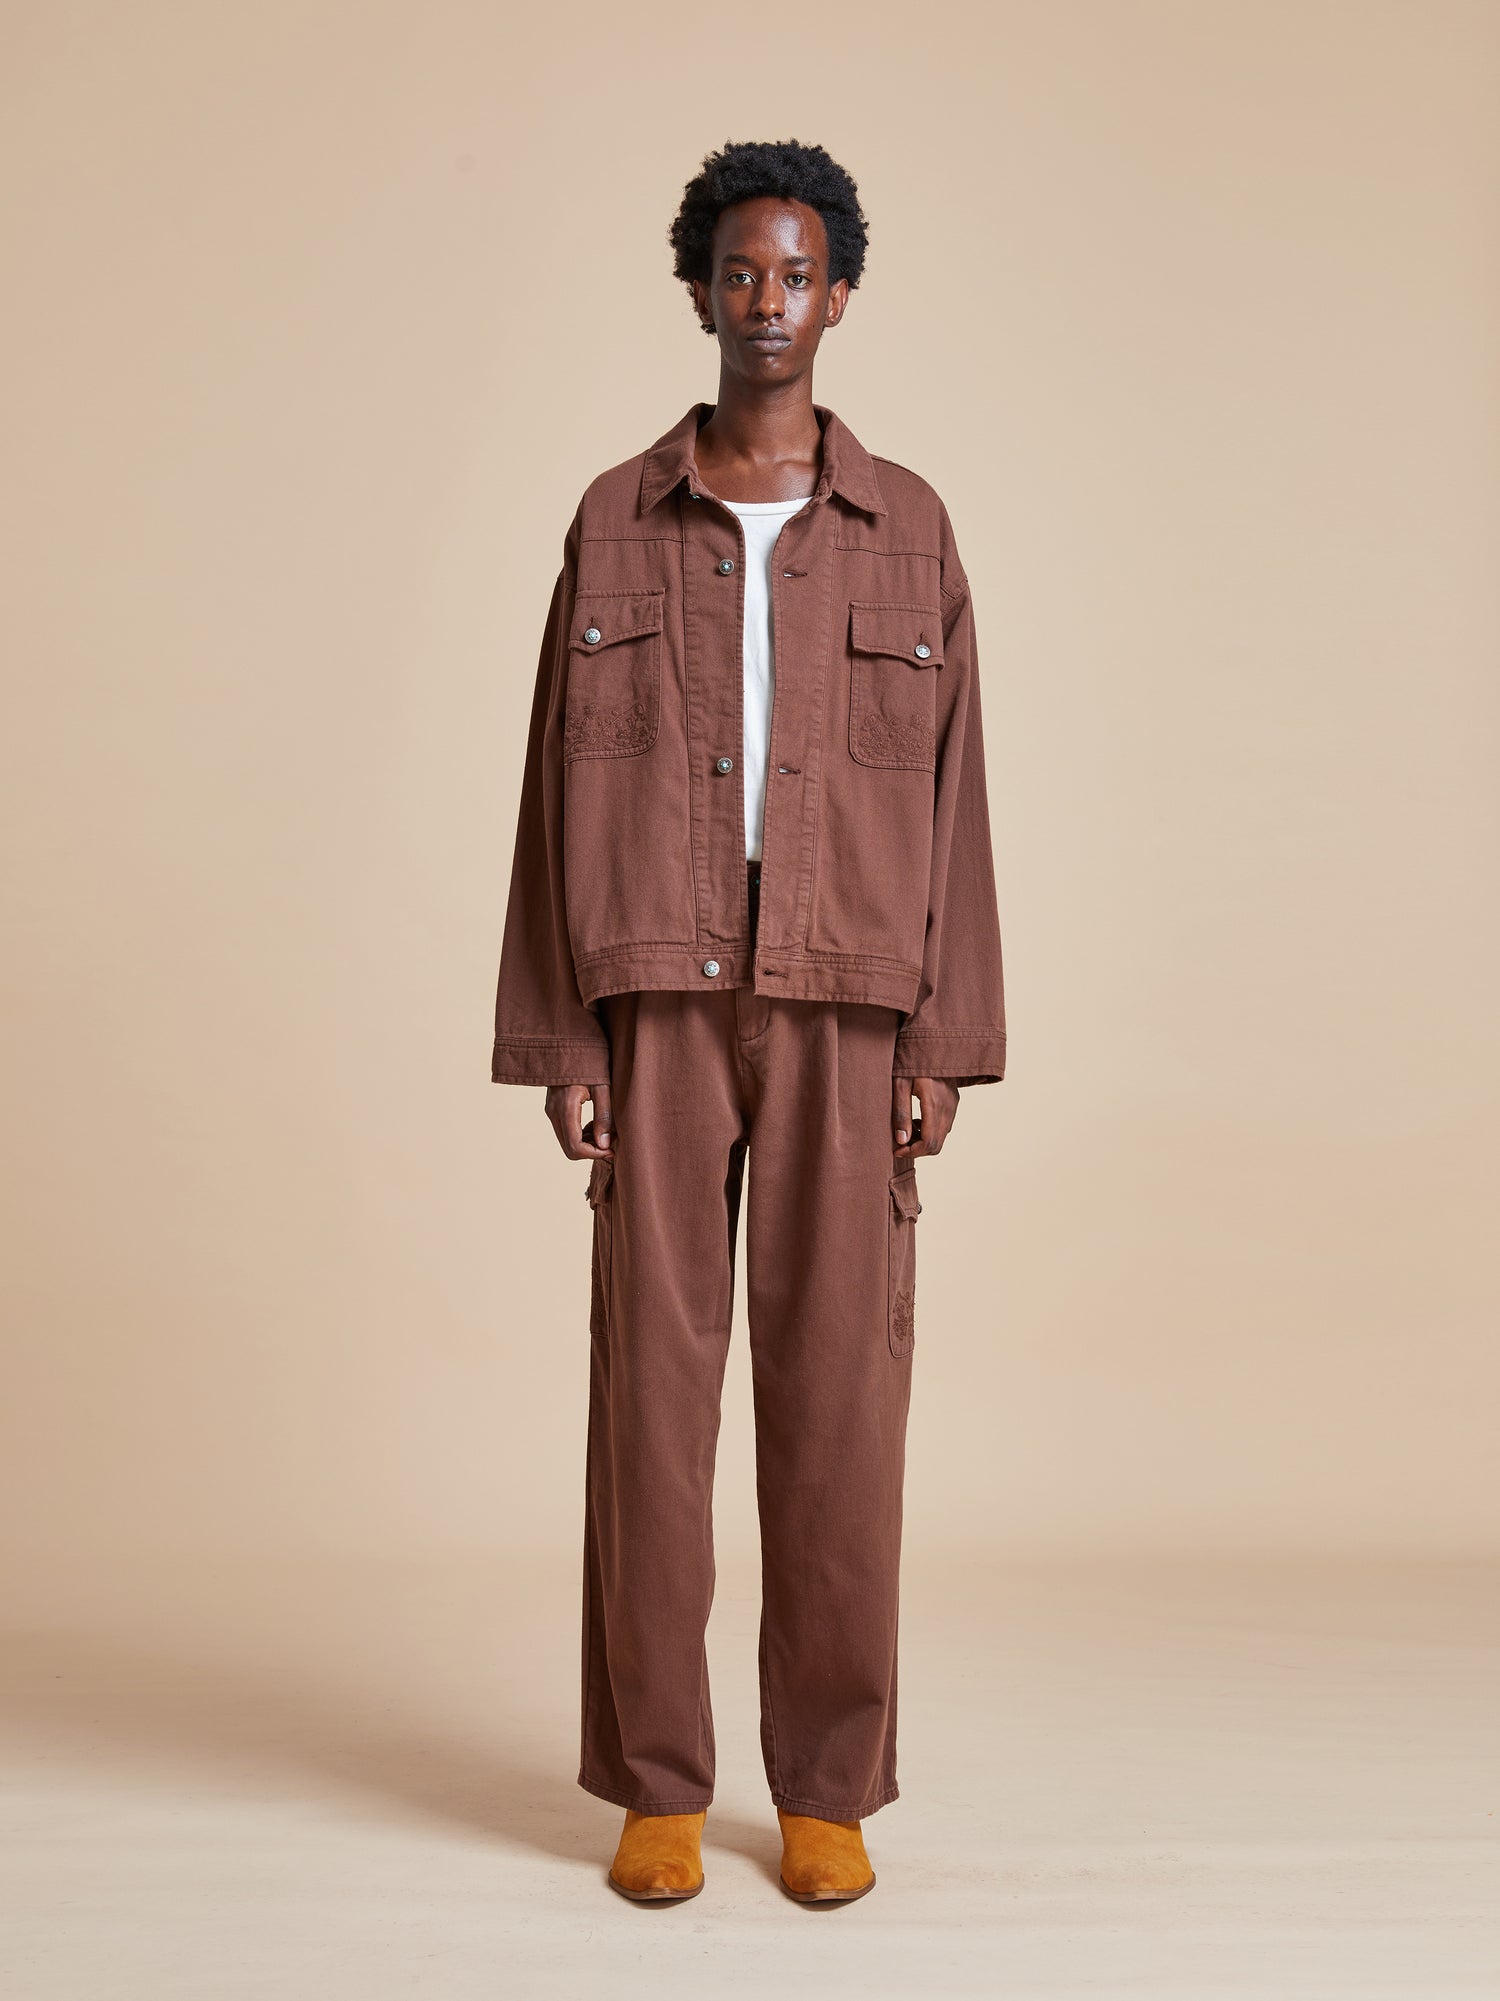 The model is wearing a Found Dusky Western Trucker Jacket and pants.